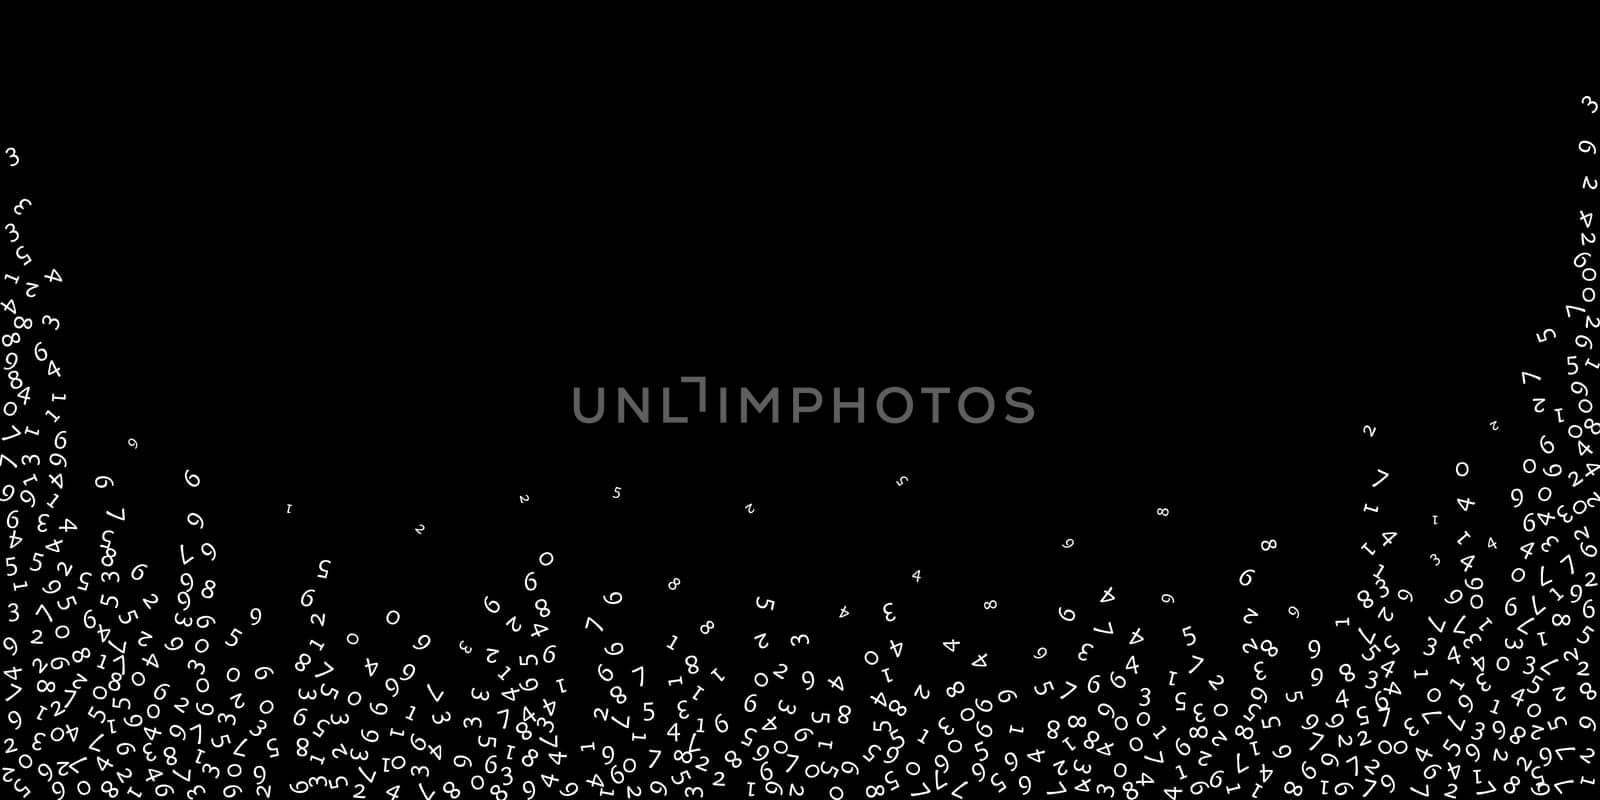 Falling numbers, big data concept. Binary white random flying digits. Marvelous futuristic banner on black background. Digital illustration with falling numbers. by beginagain